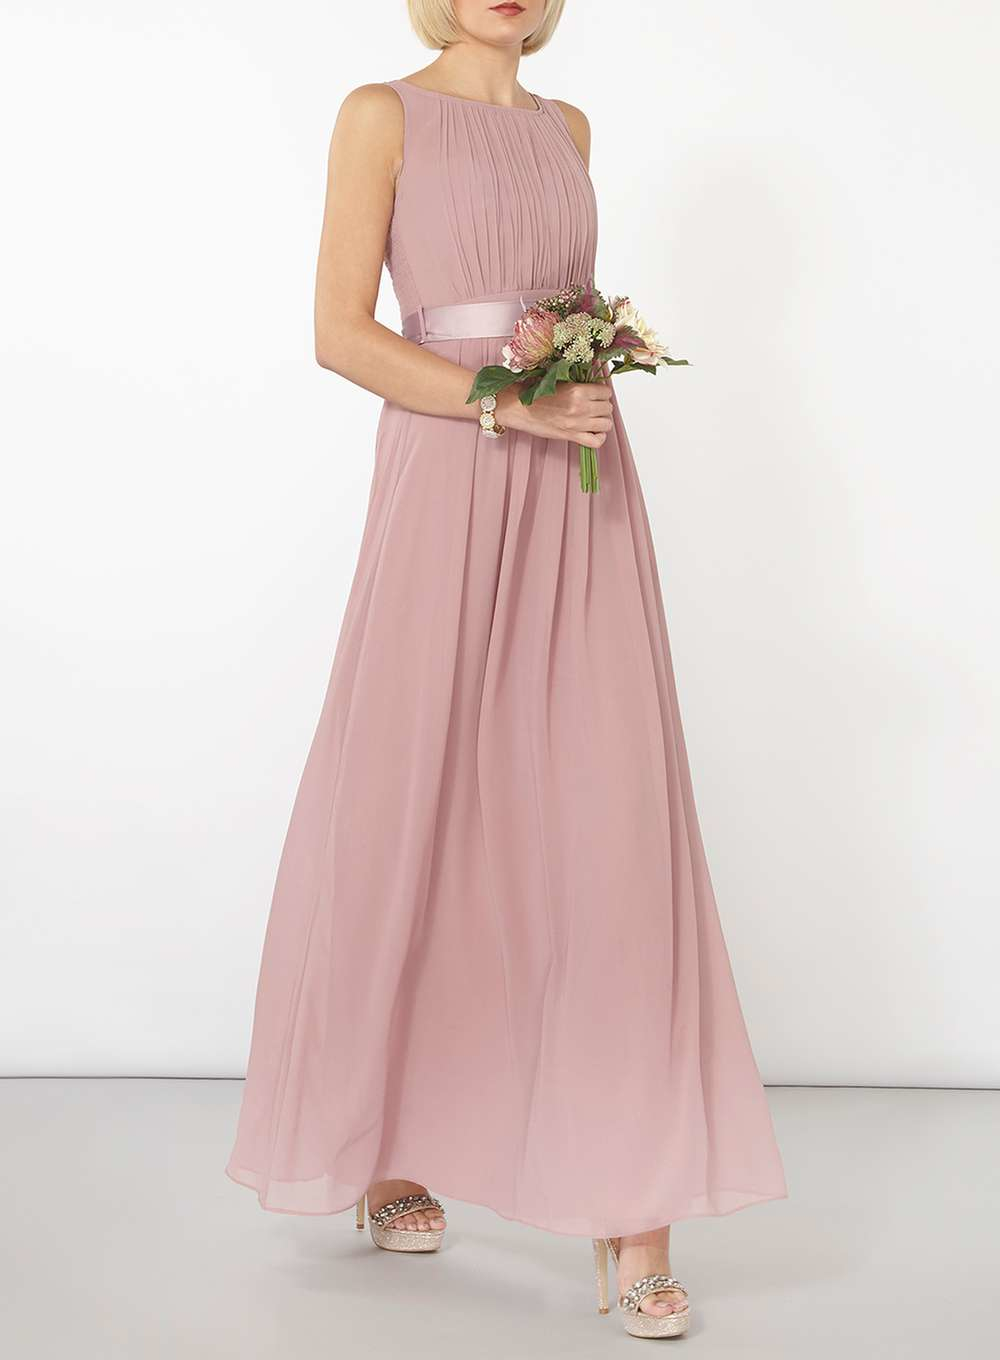 Dorothy Perkins Bridesmaid Dresses In Store Clearance, Save 57% |  jlcatj.gob.mx